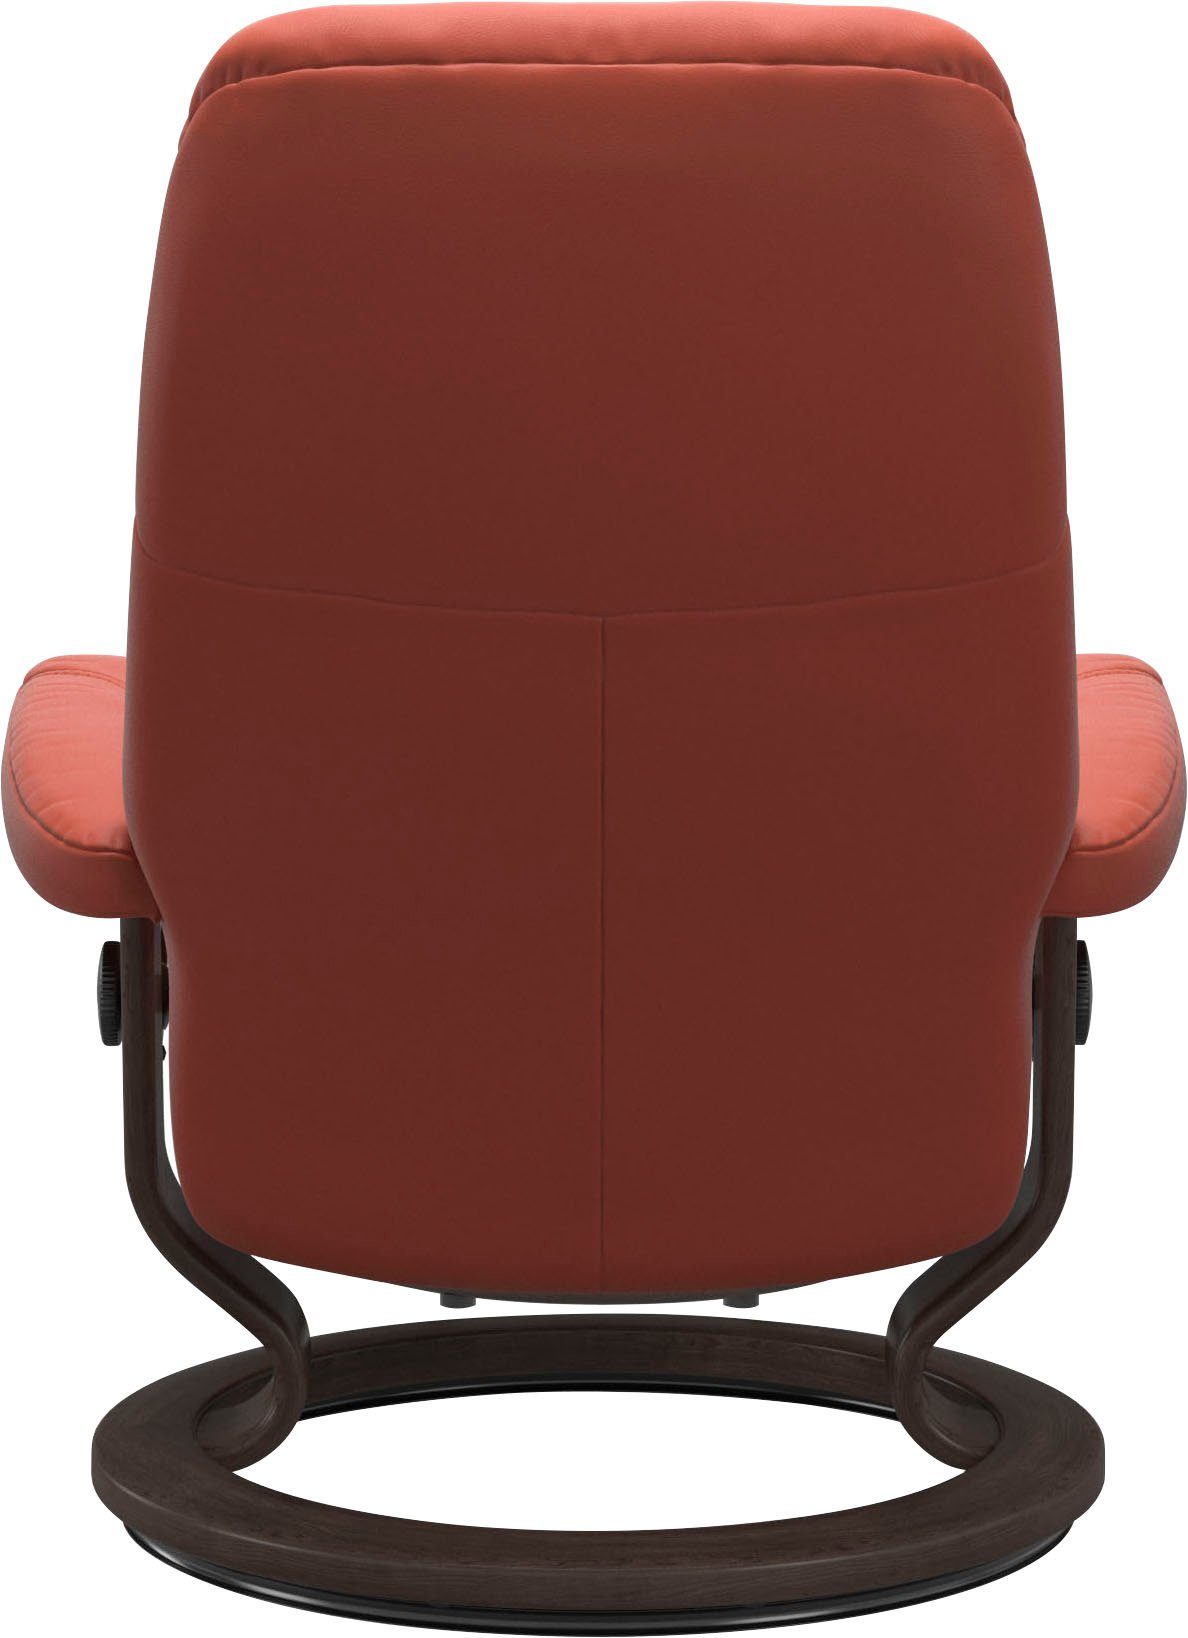 Relaxsessel mit Stressless® Base, Consul, S, Wenge Classic Größe Gestell